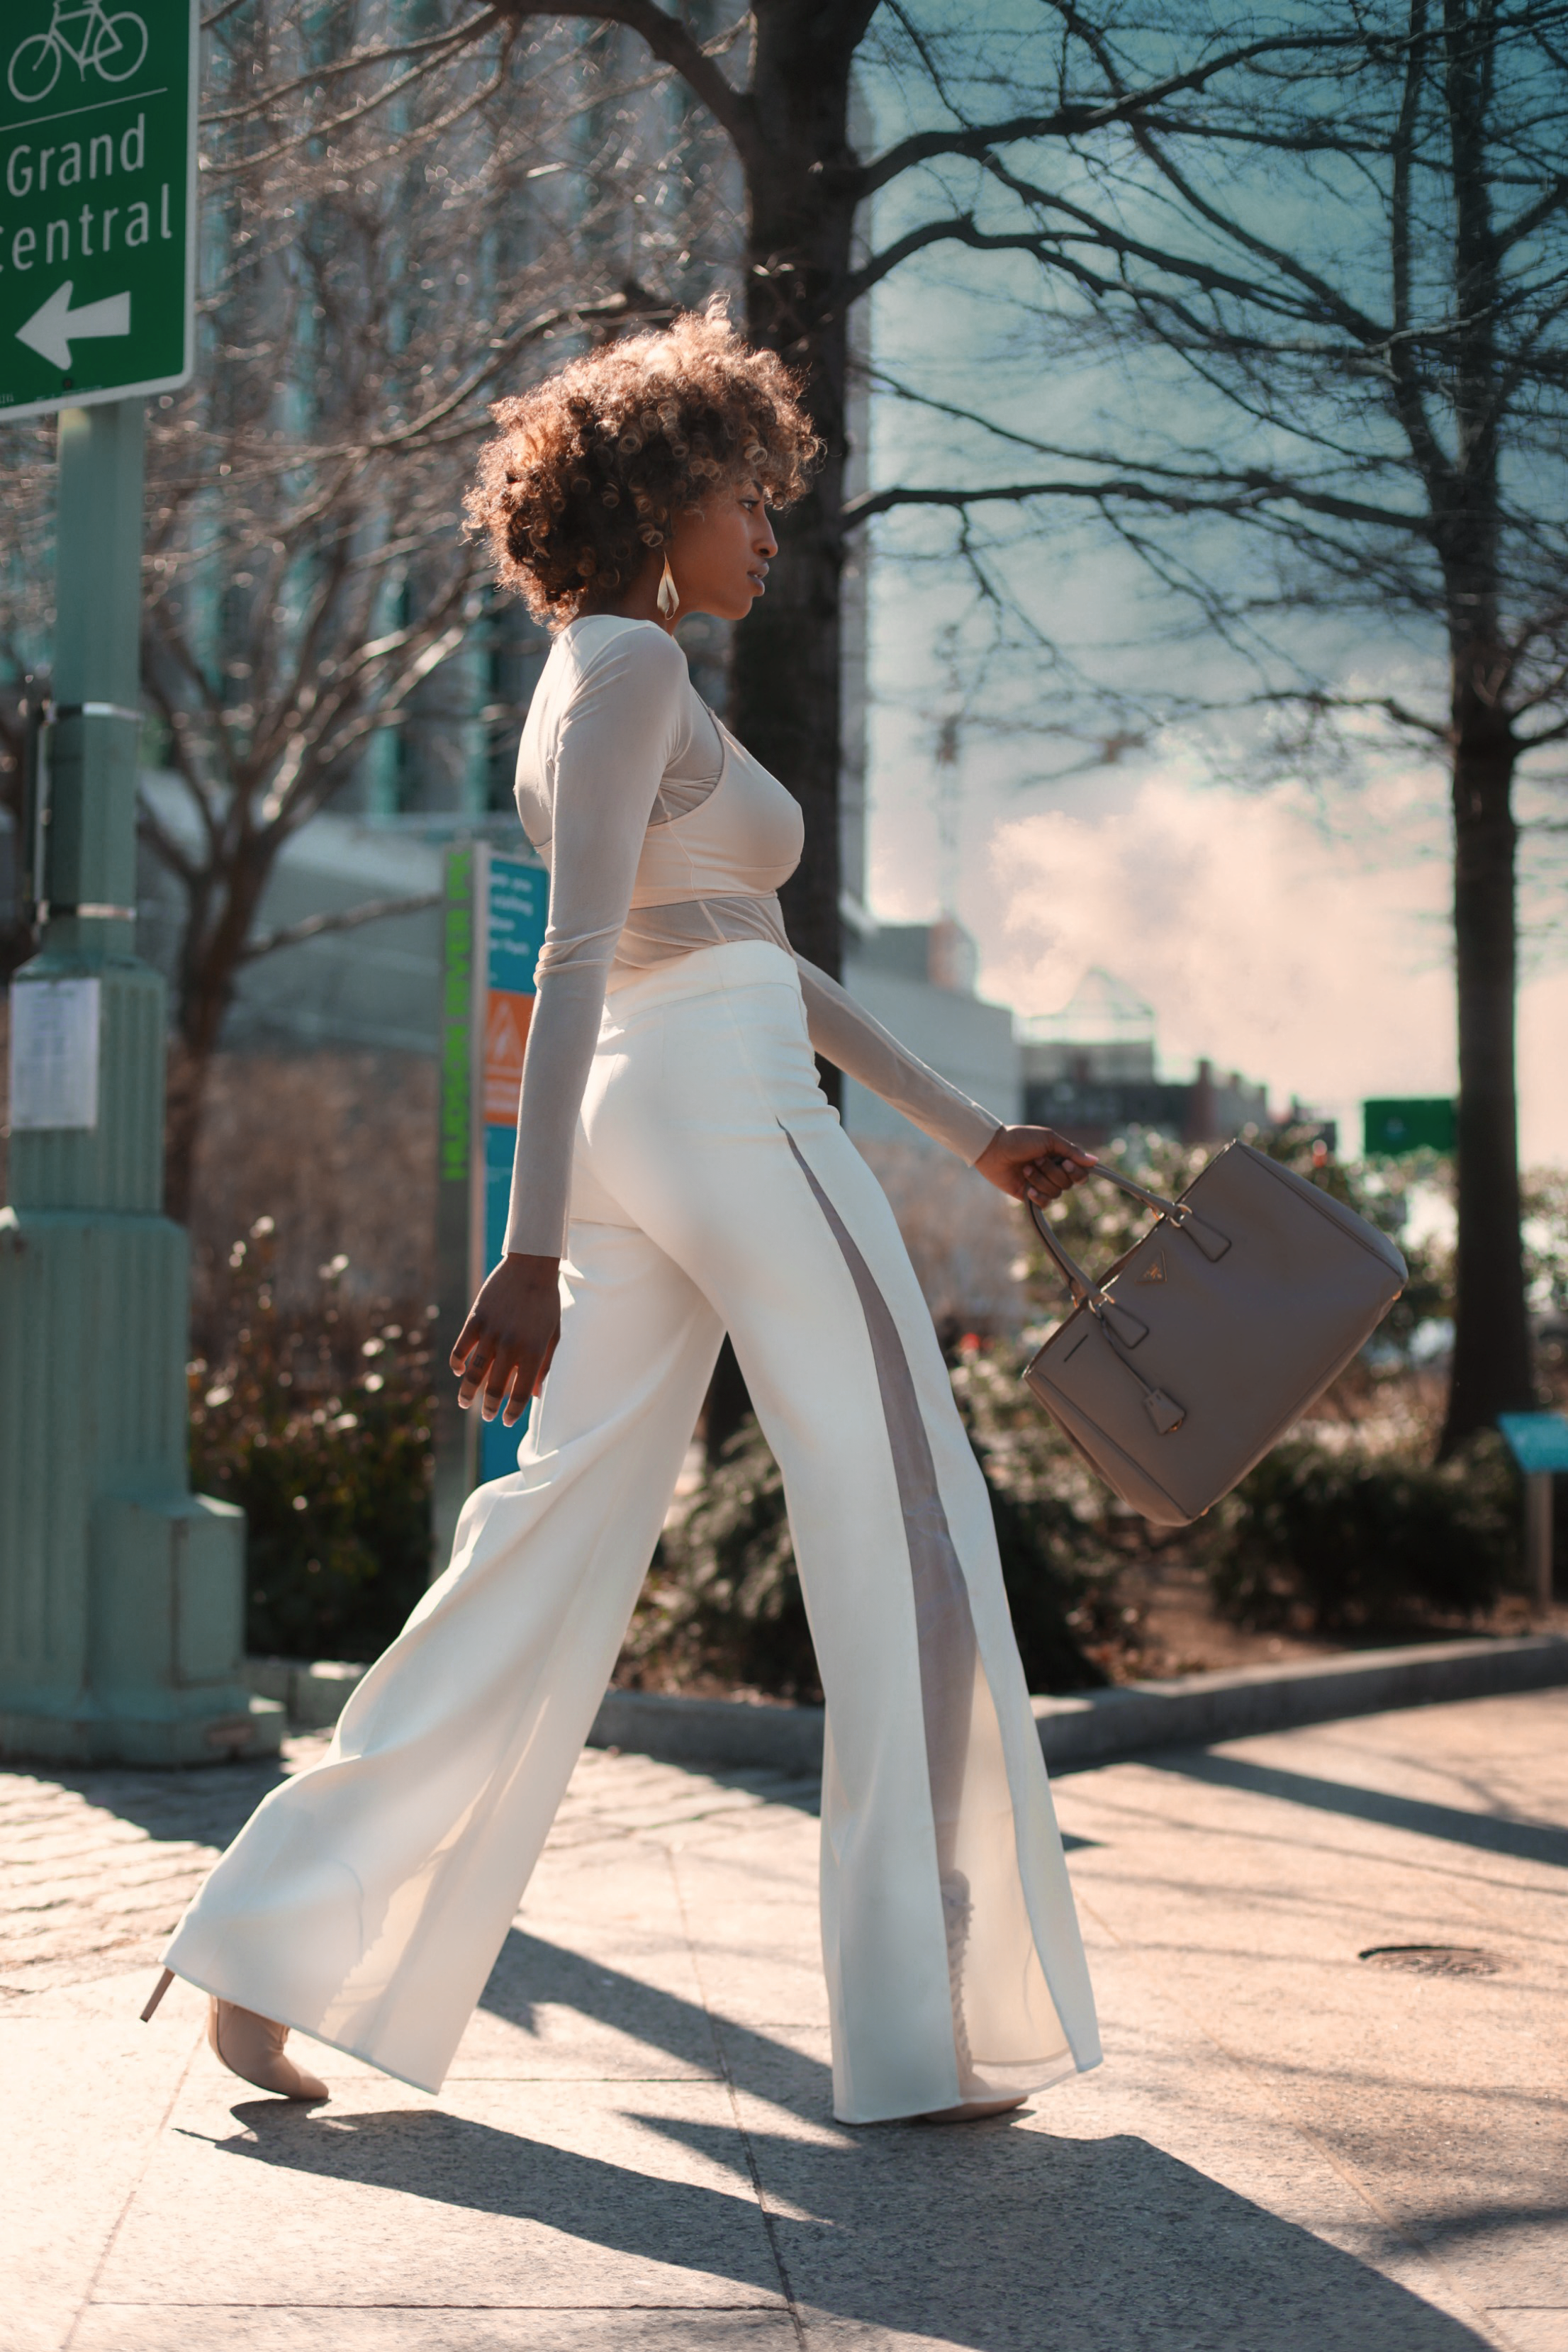 11 White Jeans Outfits That Have the Street Style Seal of Approval | Vogue